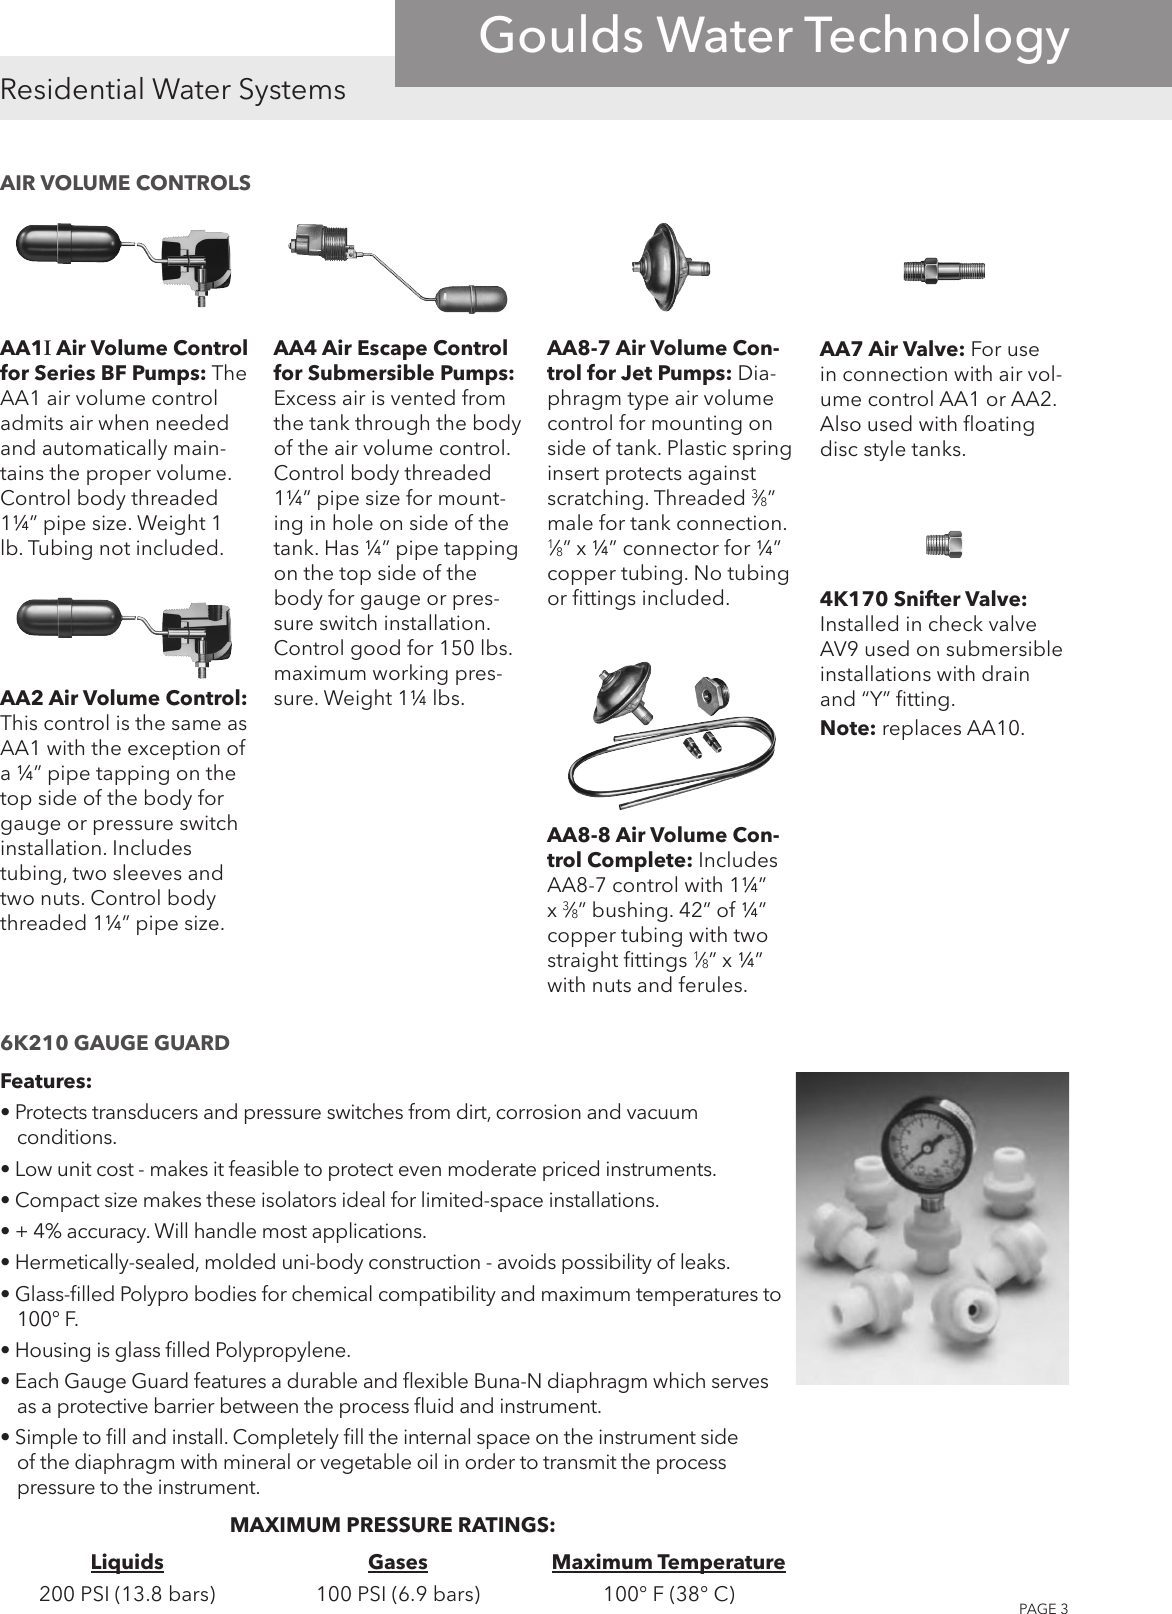 Page 3 of 4 - 538800 1 Goulds Accesories And Fittings Brochure